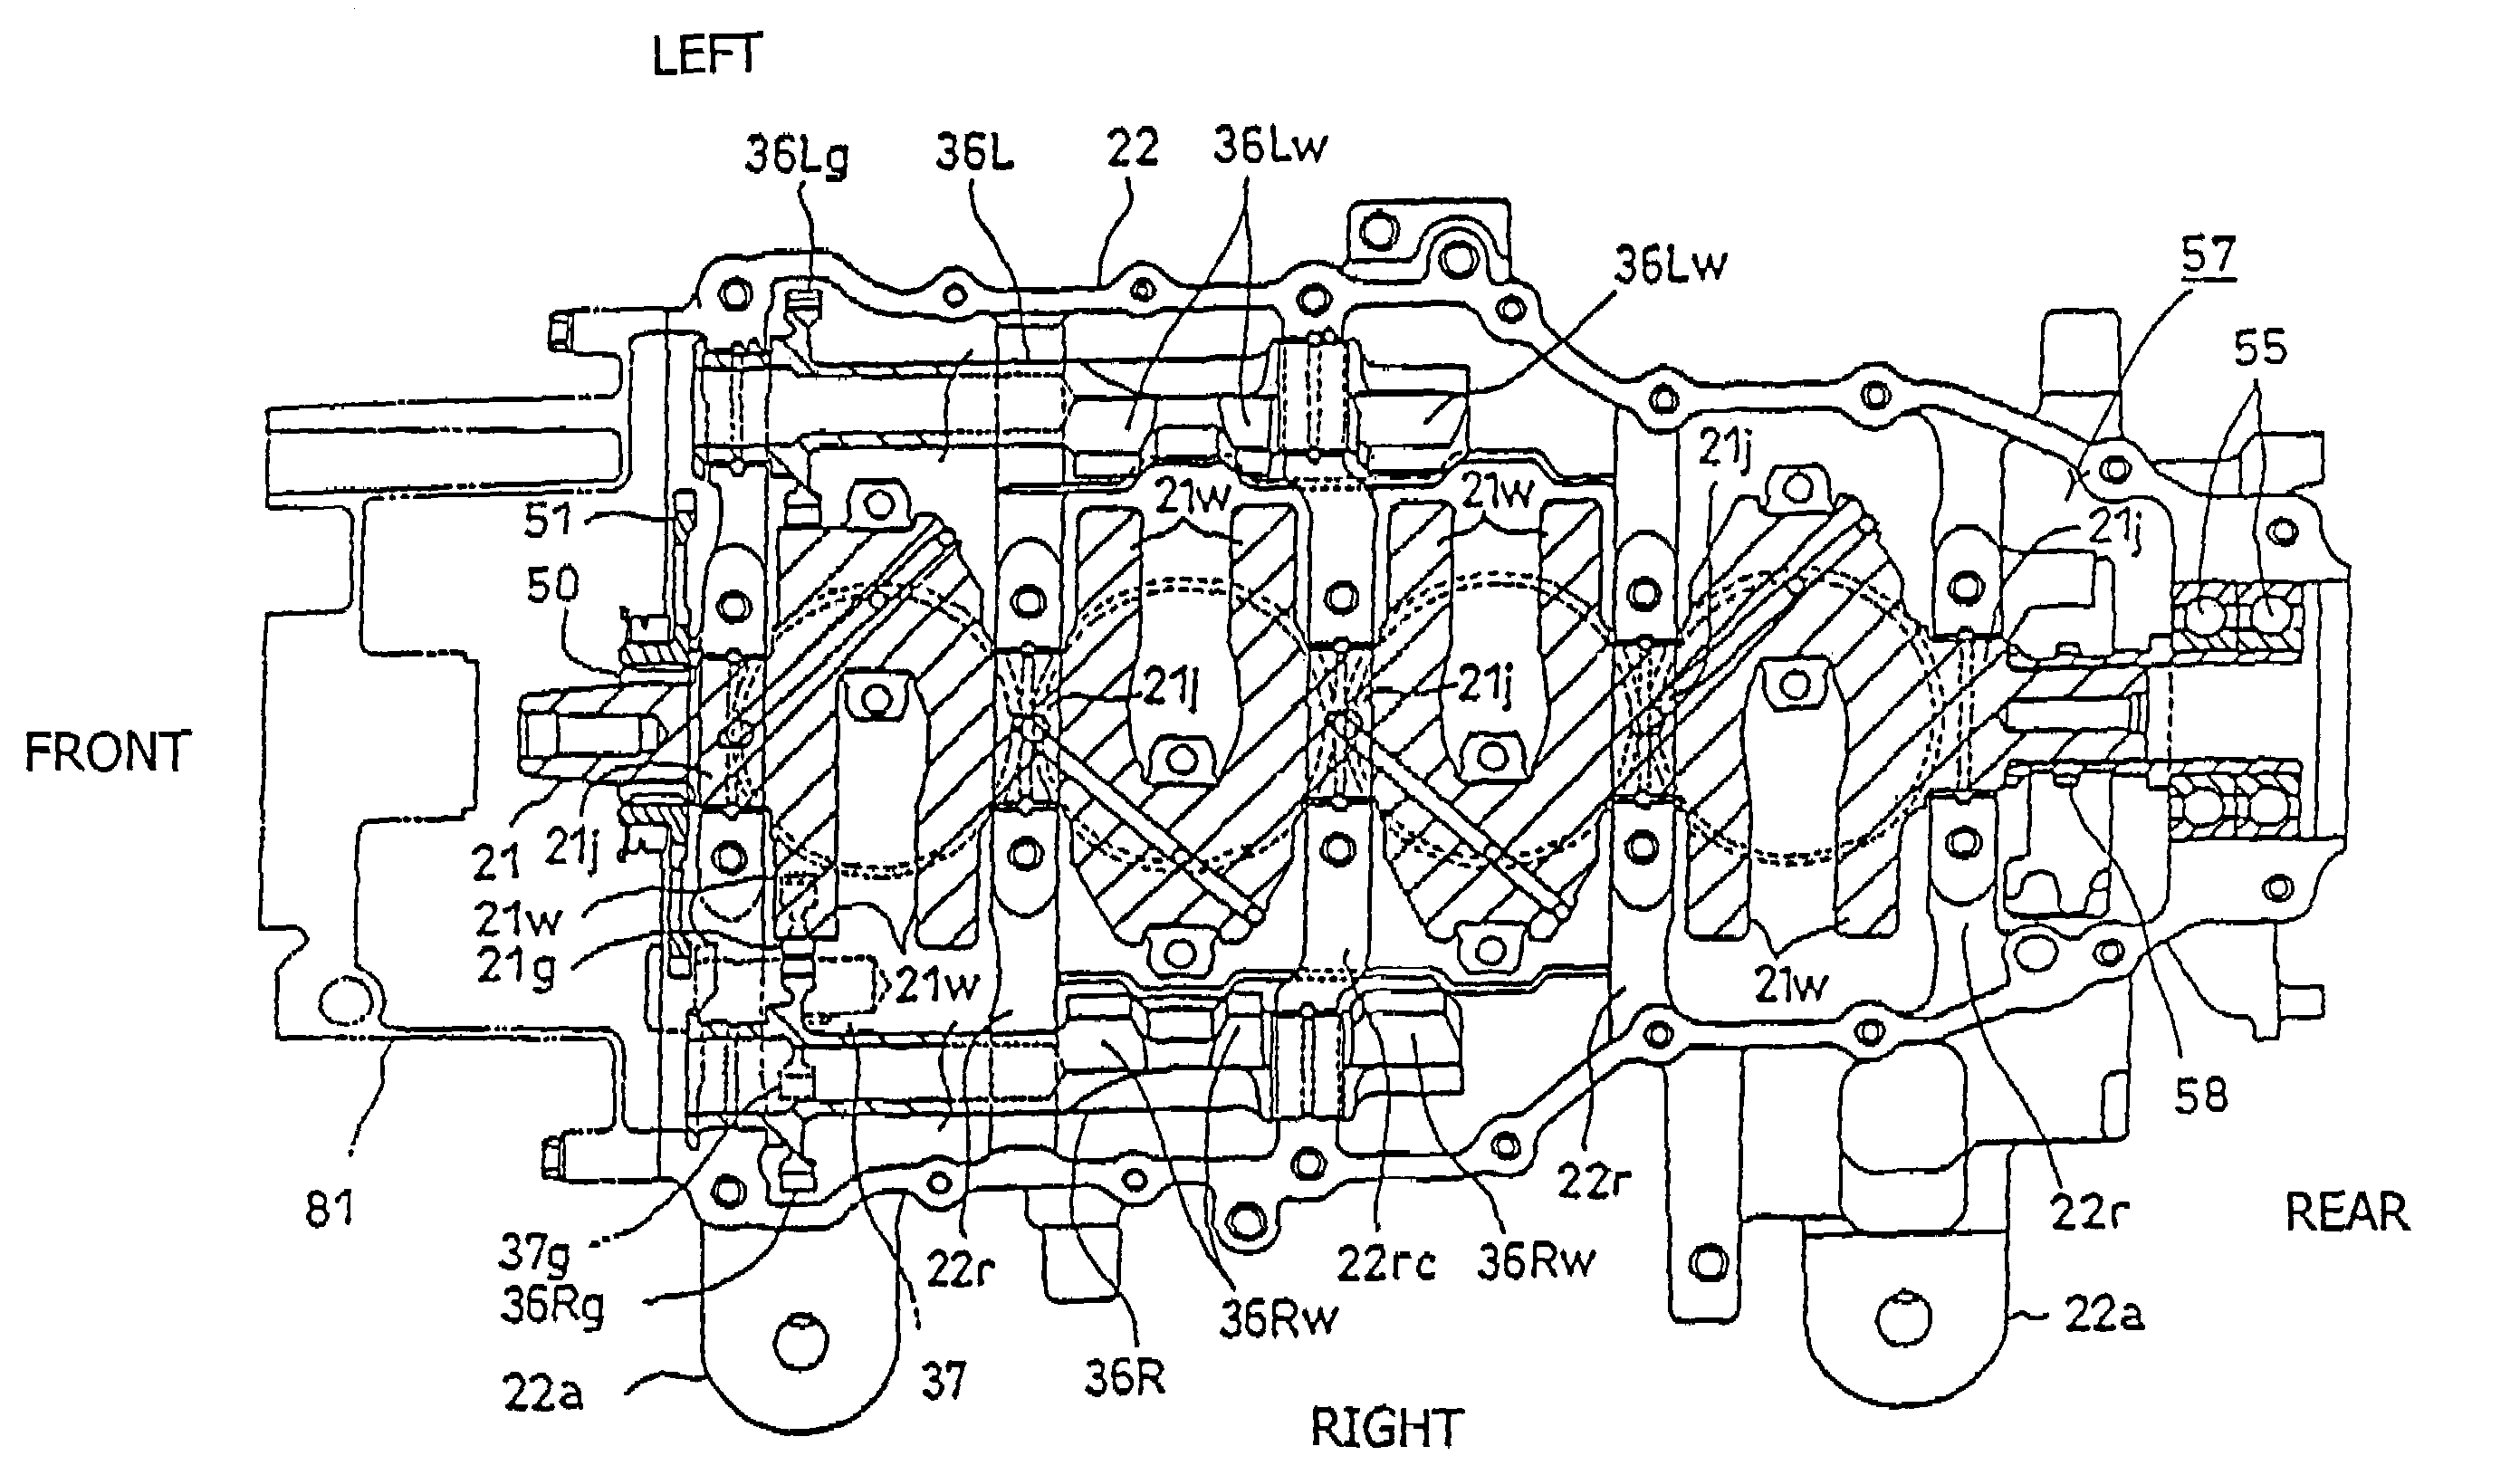 Internal combustion engine including improved balance shaft structure, and personal watercraft incorporating same